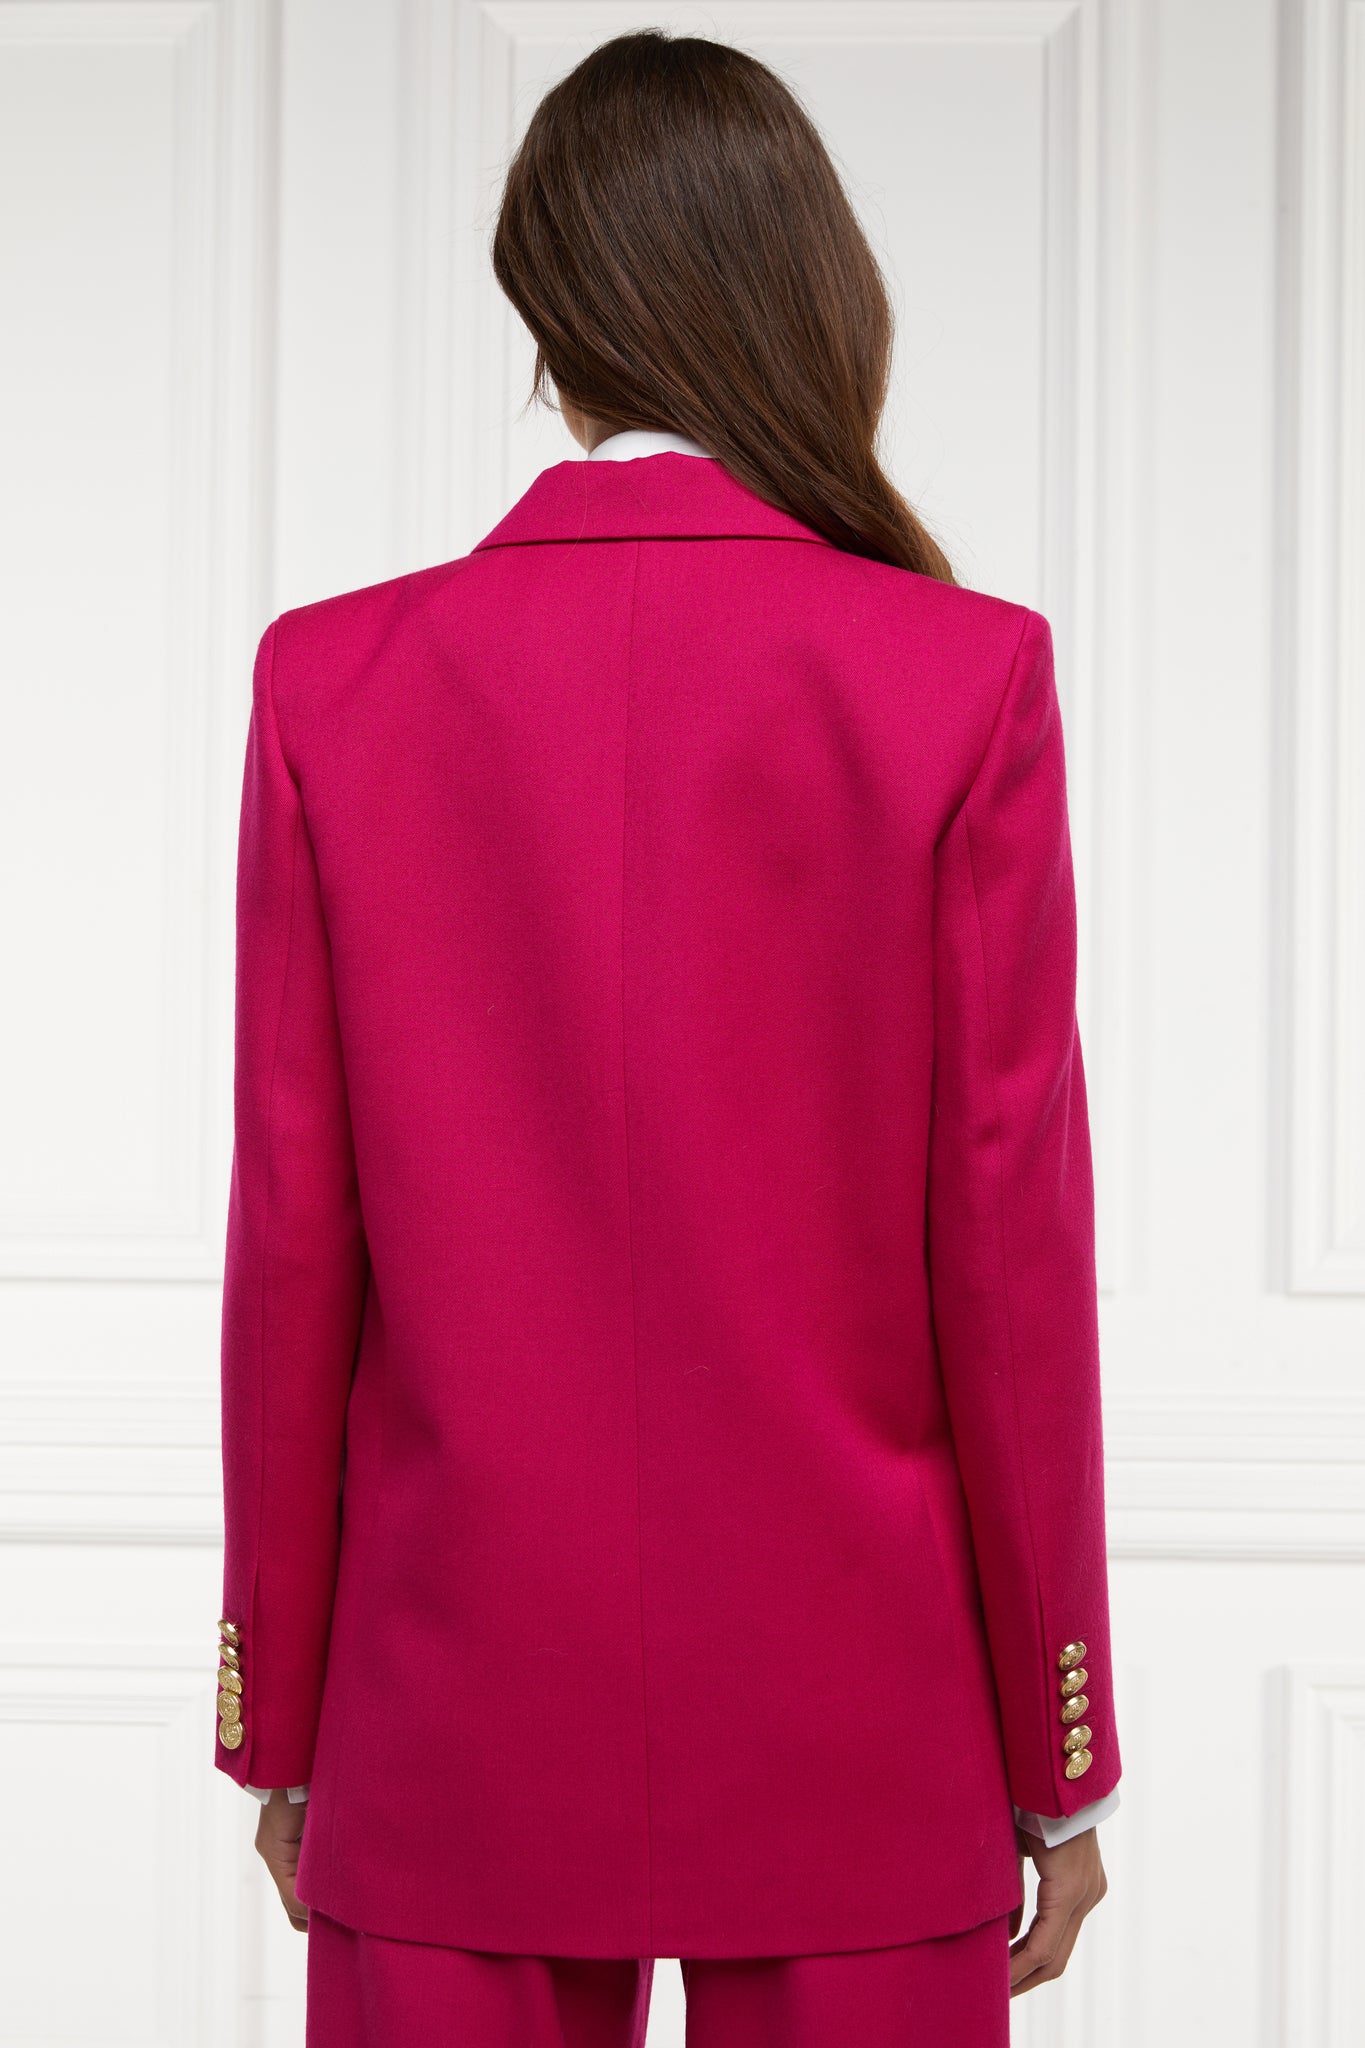 back of longline double breasted wool blazer in hot pink tailor made in britain with relaxed fit welt pockets and gold buttons on the front and cuffs